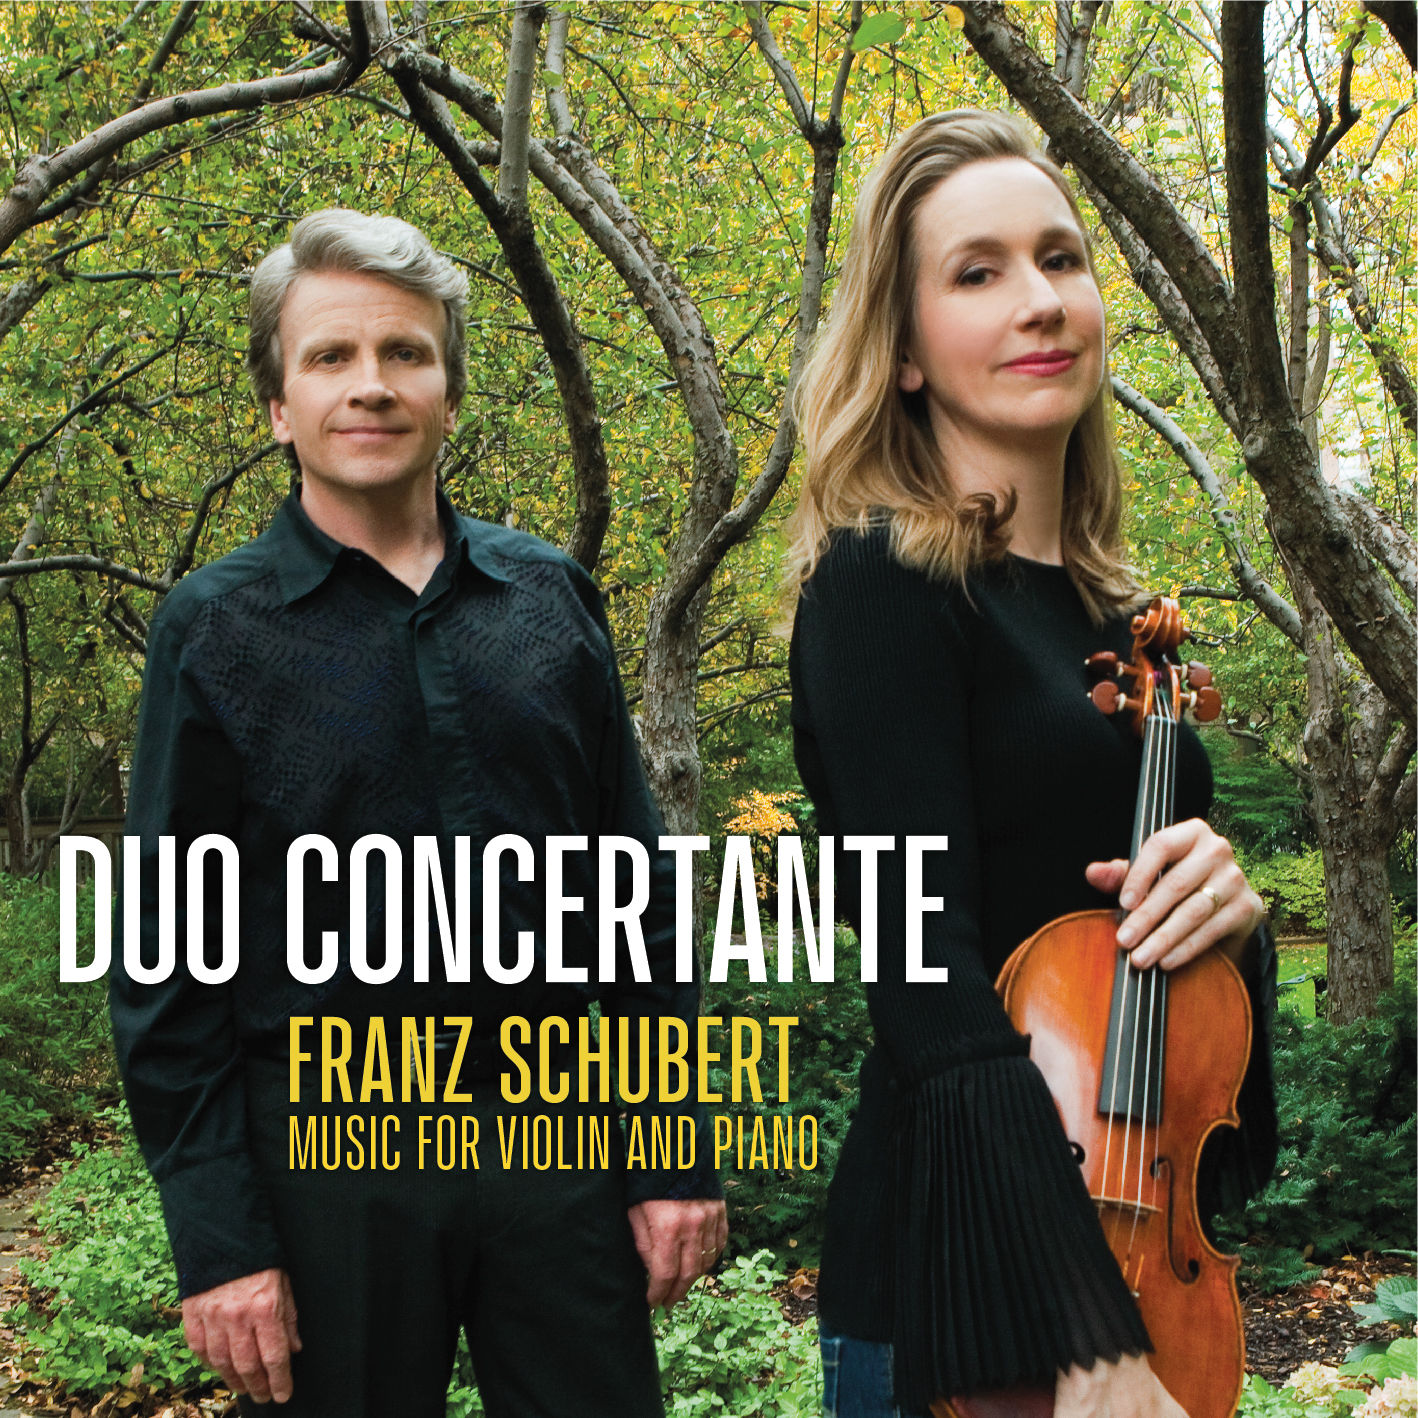 Duo Concertante - Franz Schubert Music for Violin and Piano (2020) [FLAC 24bit/96kHz]